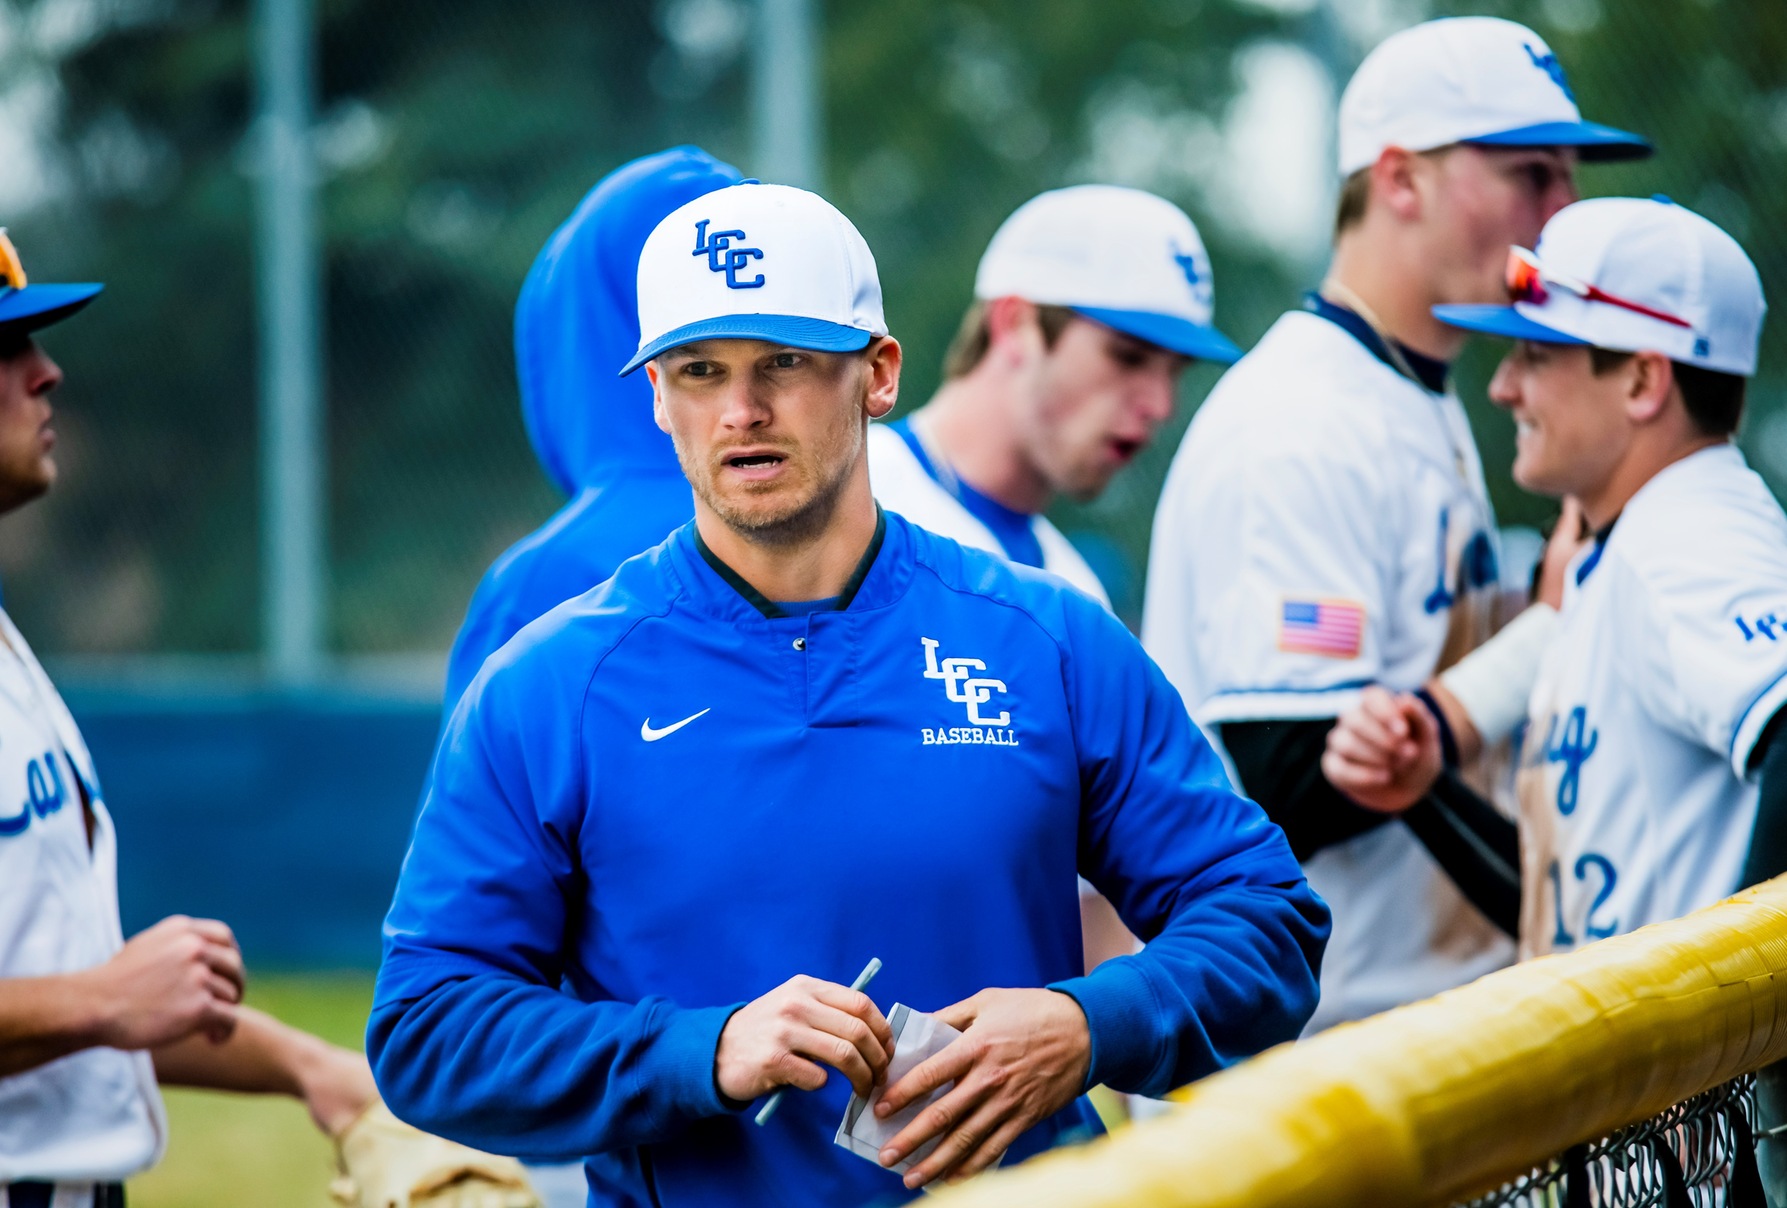 ‘Perfect Game’ Ranks 2020’s LCC Baseball Team “Top 50 in the Country”